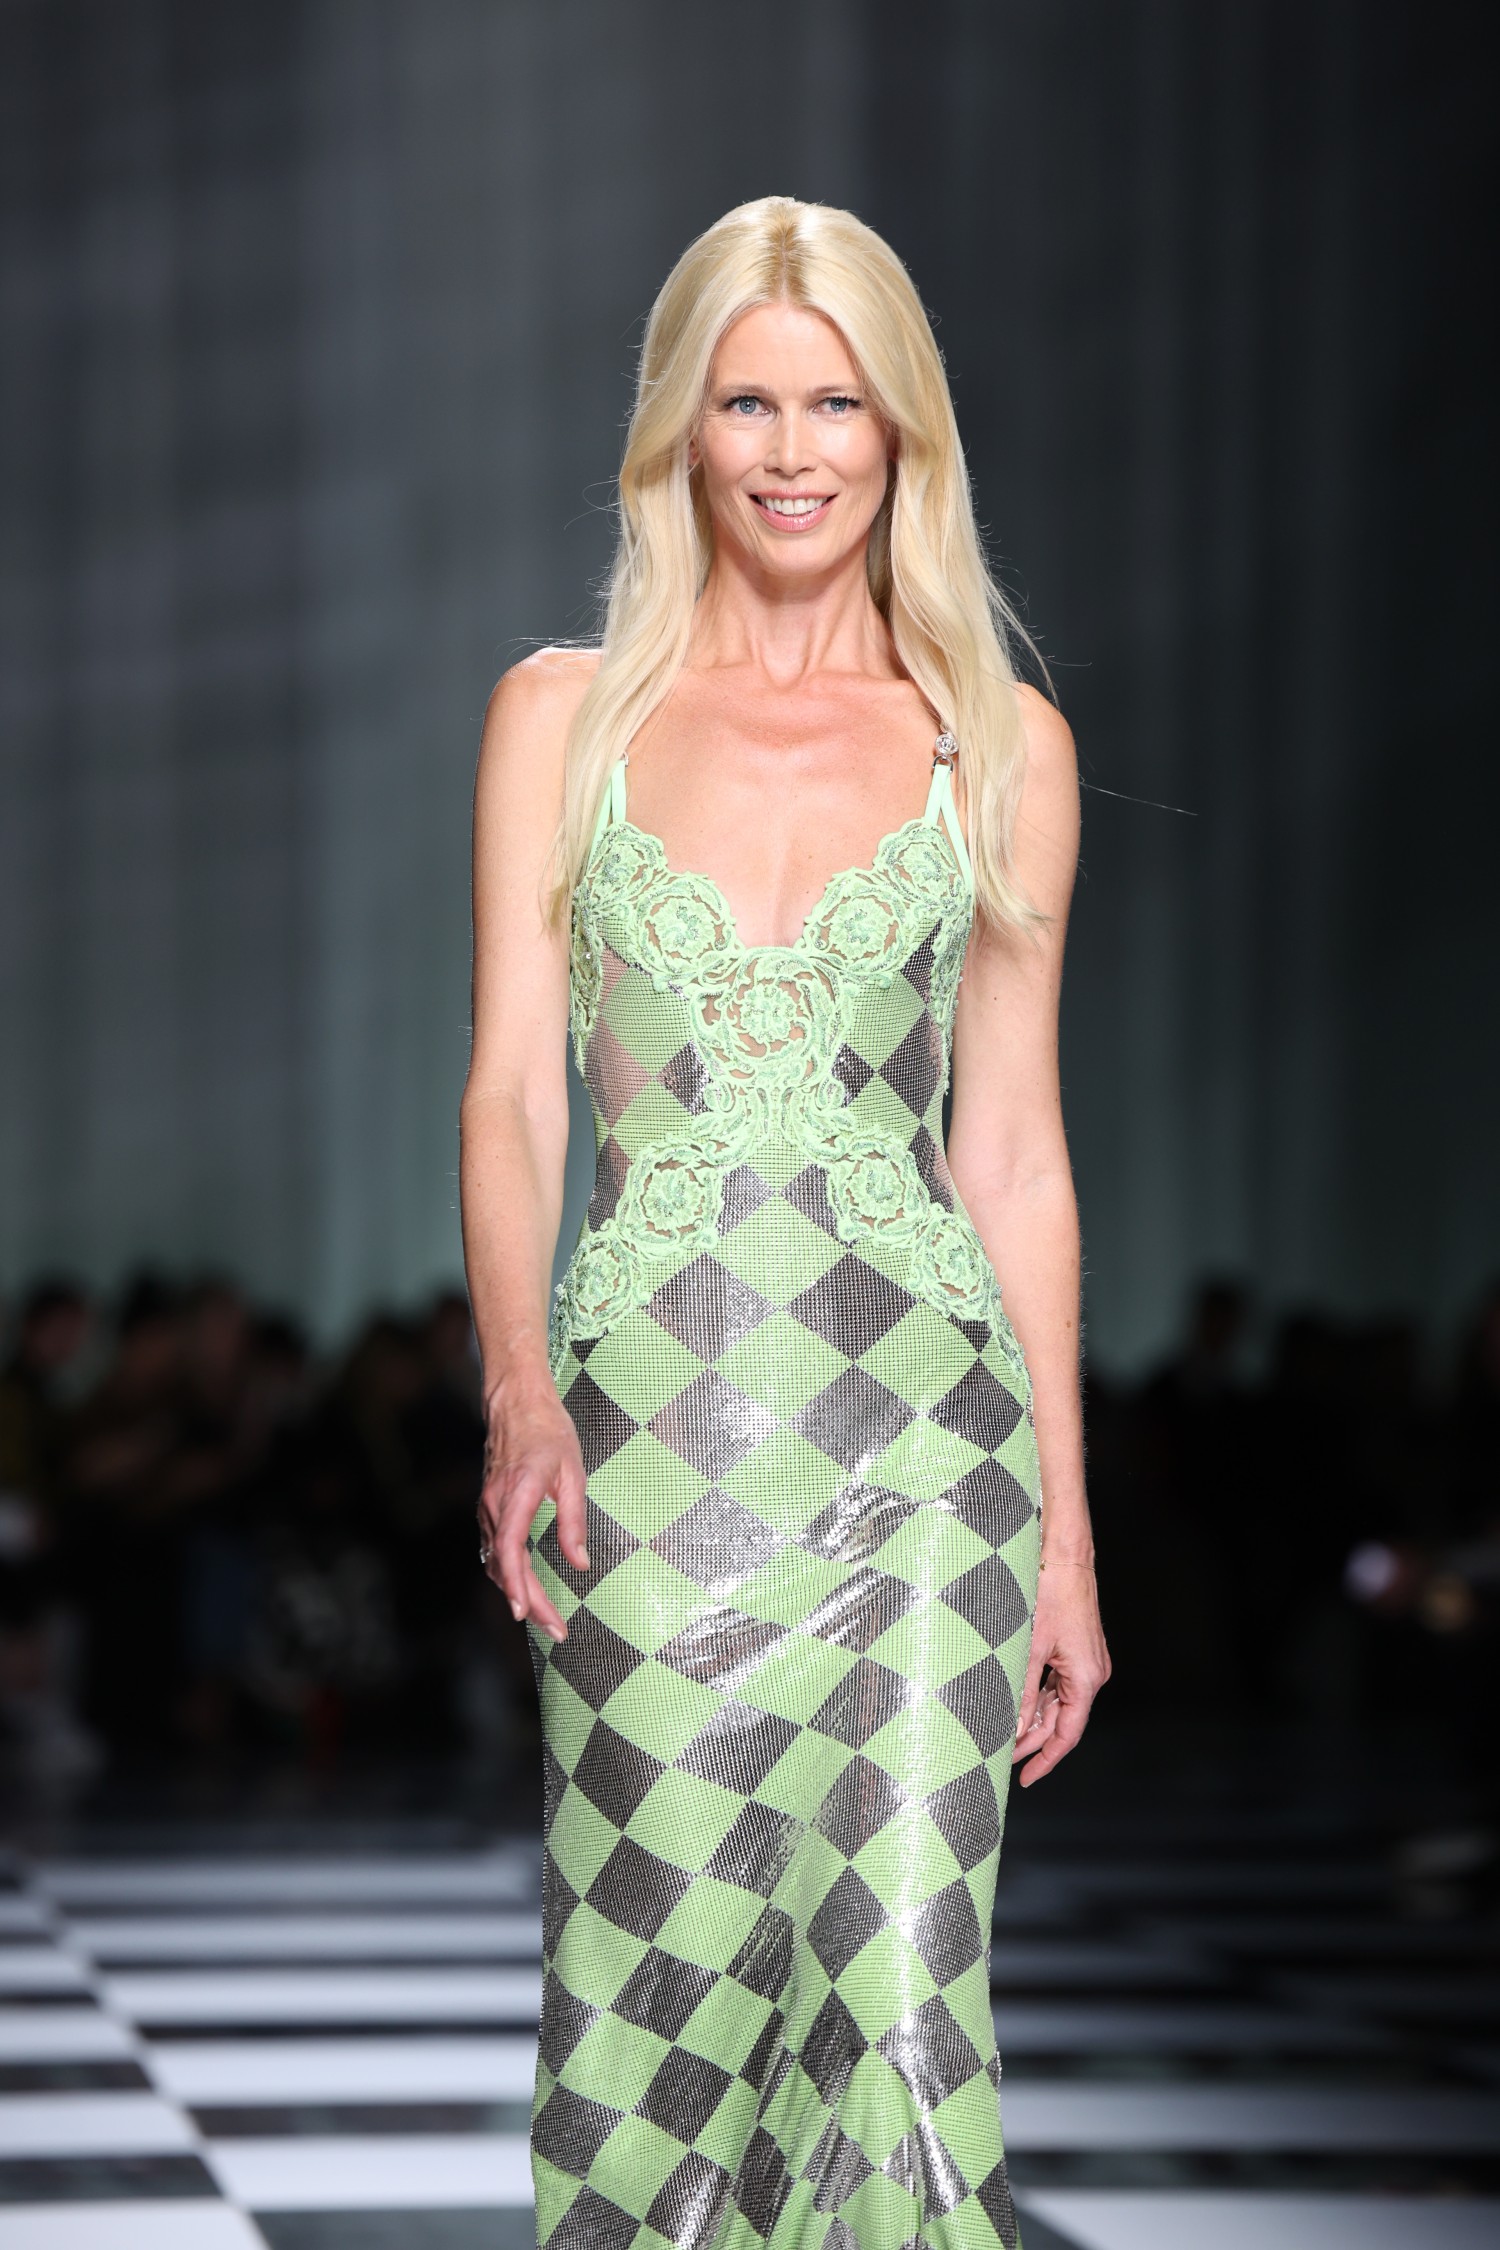 Claudia Schiffer's daughter looks just like her mom